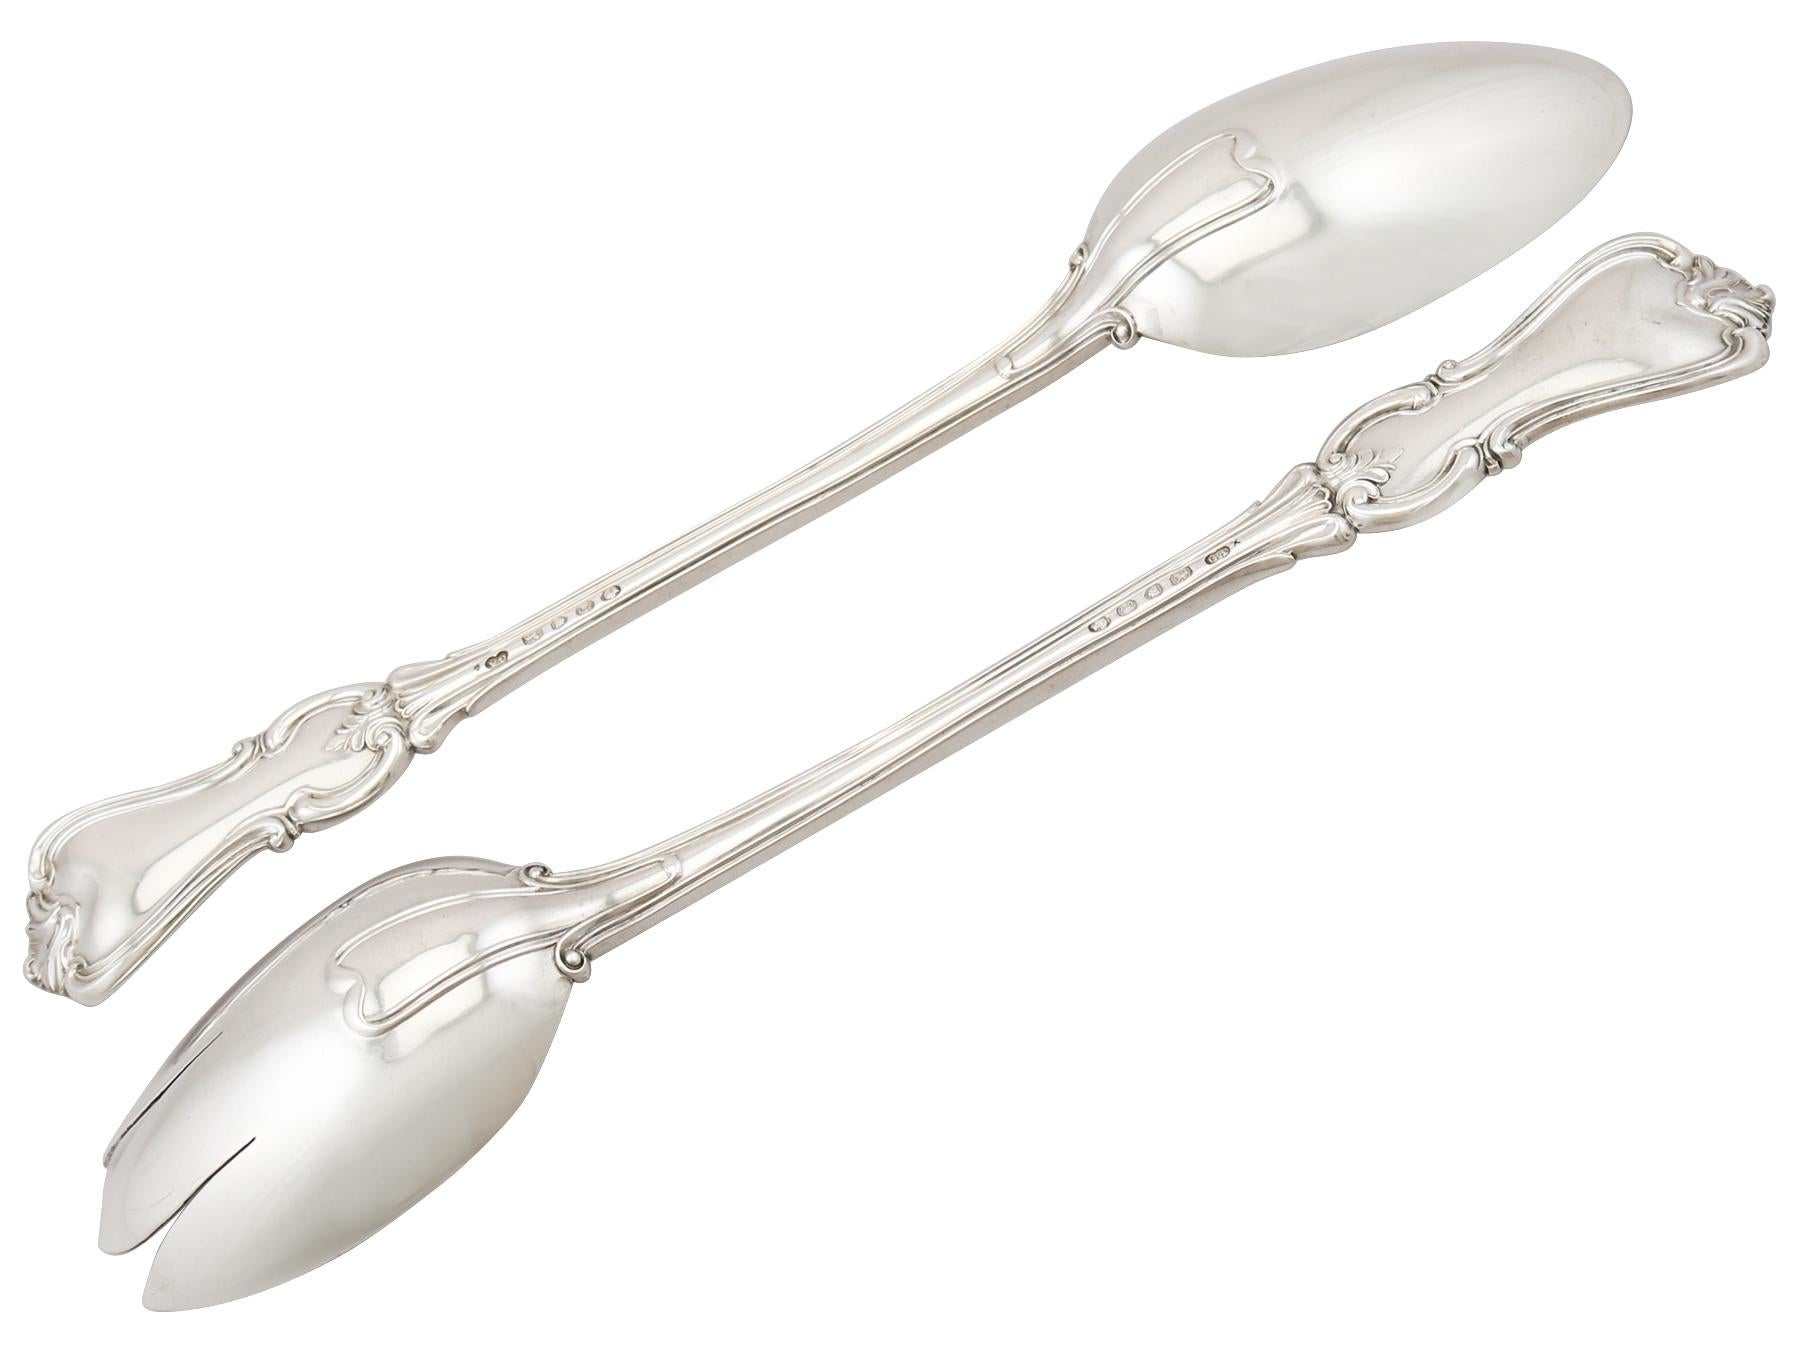 An exceptional, fine and impressive pair of antique Victorian English sterling silver Albert pattern salad servers made by George William Adams; an addition to our silver flatware collection.

These exceptional antique Victorian sterling silver